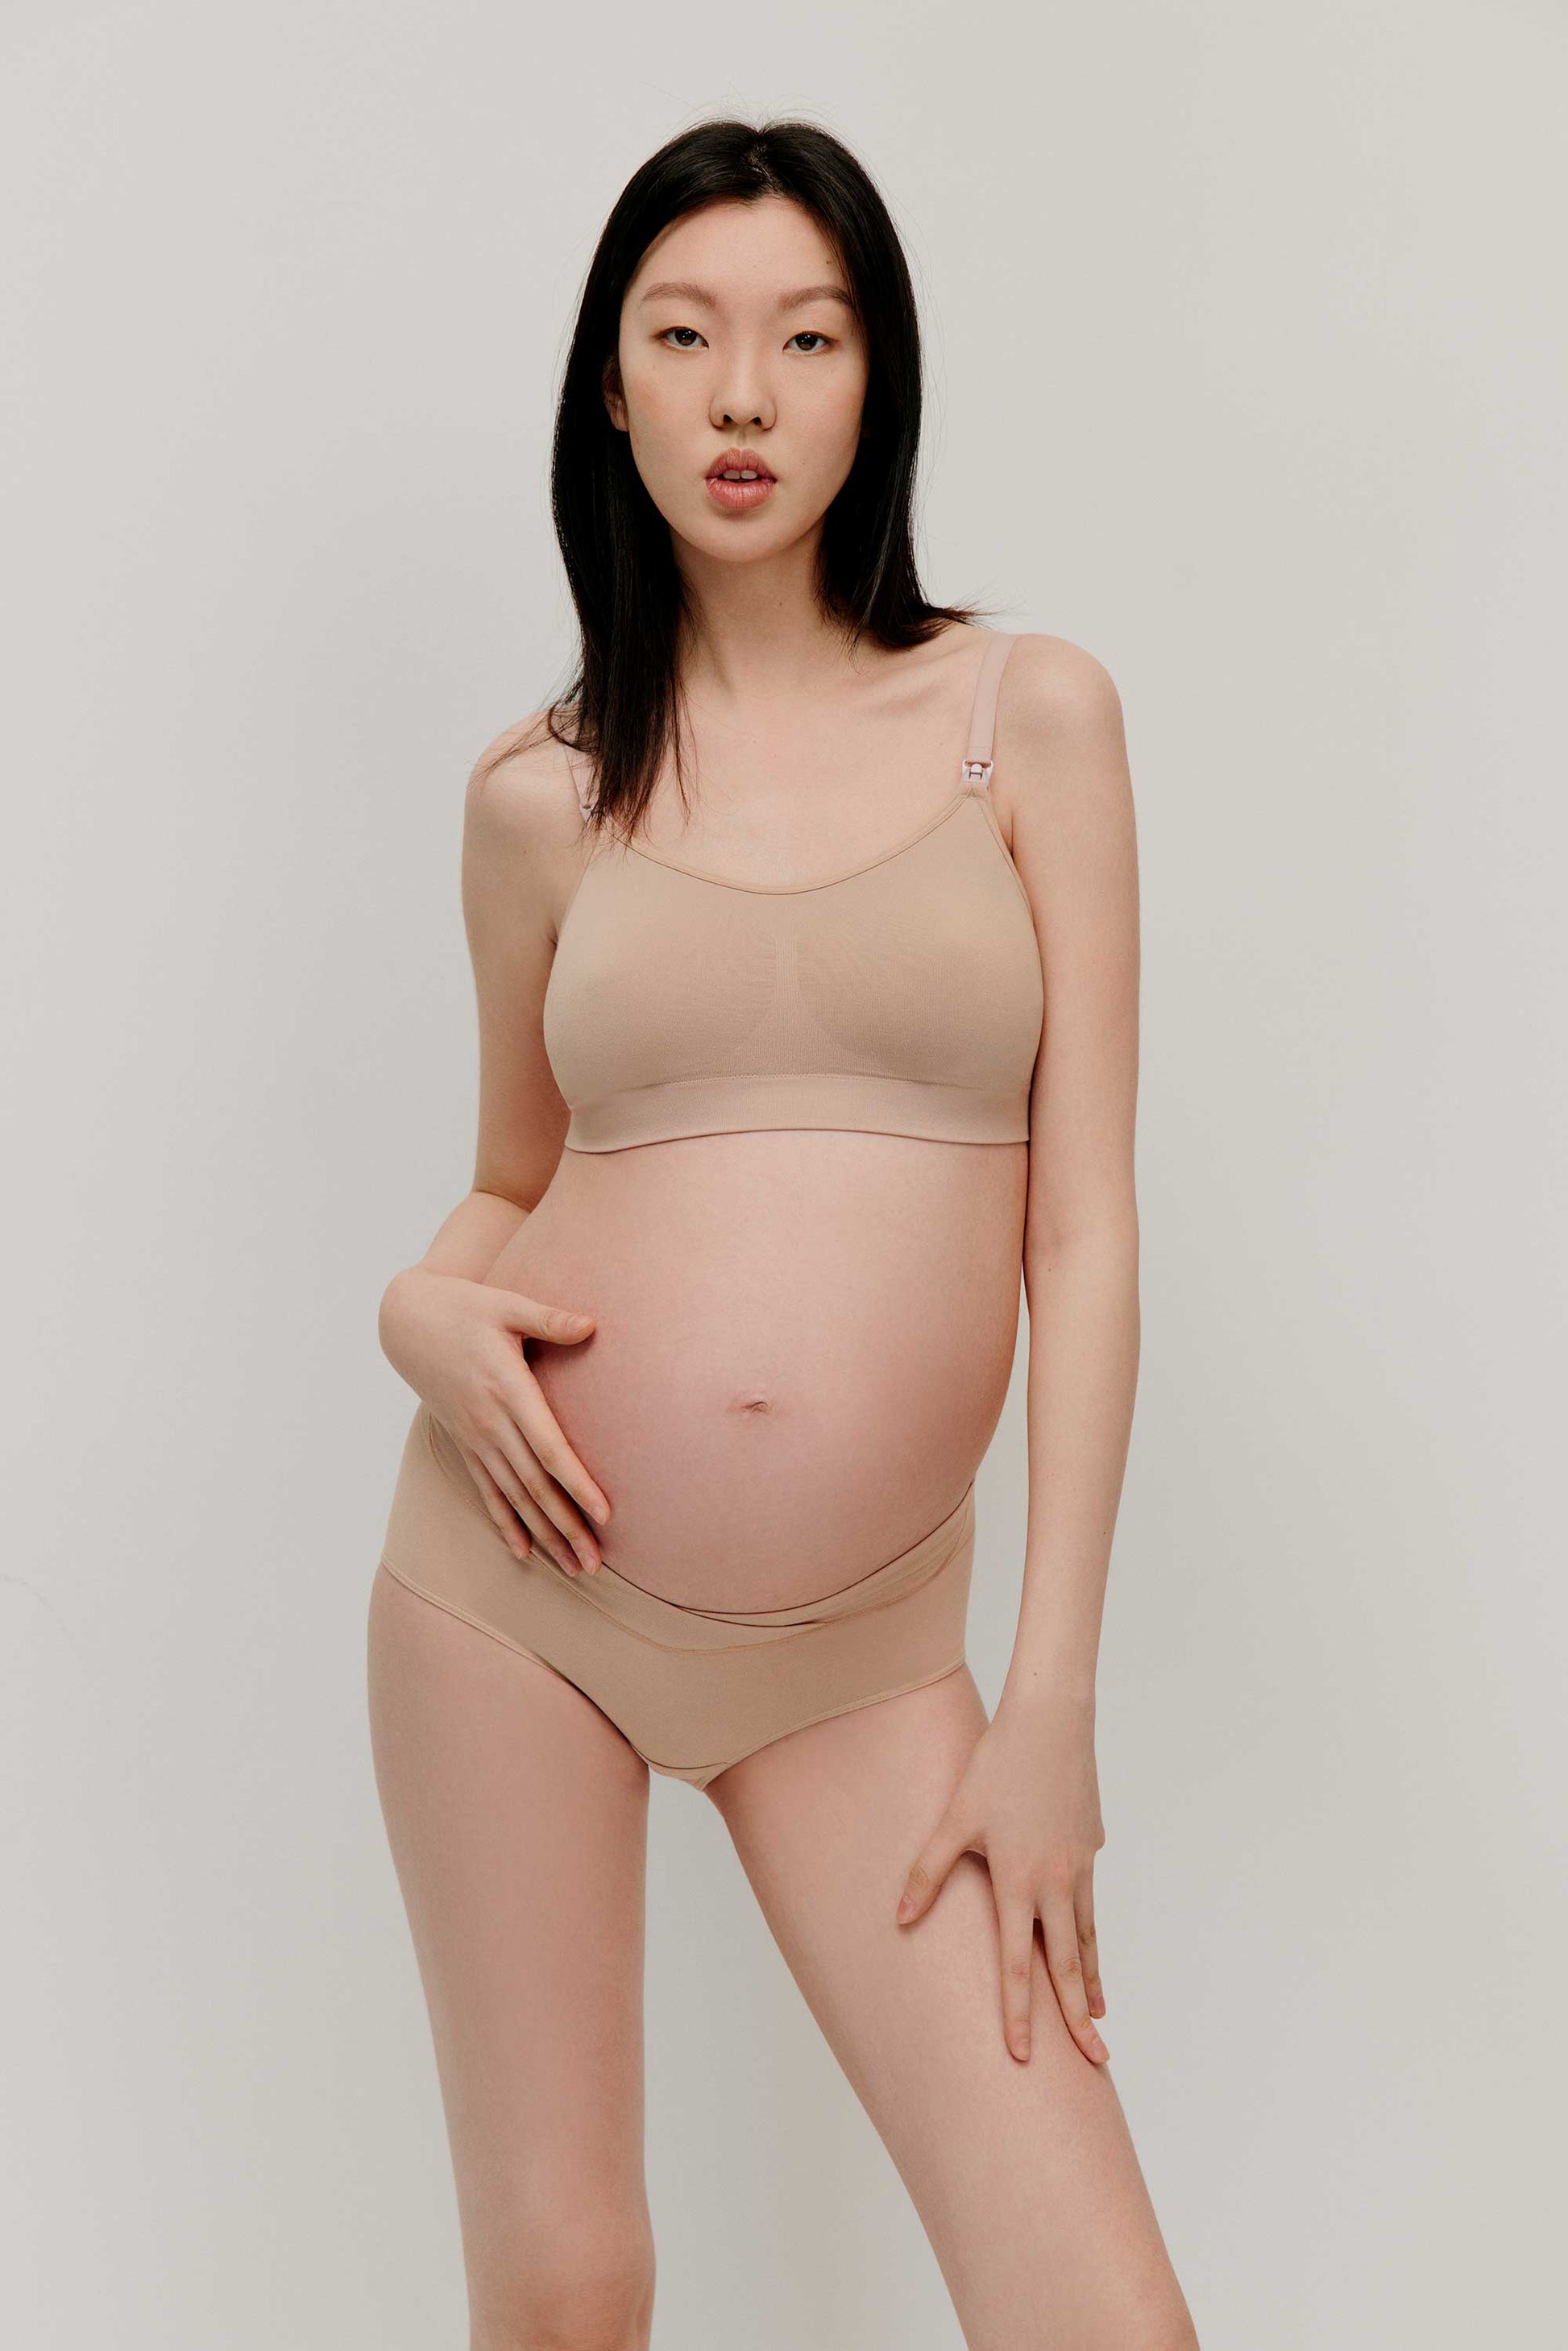 Maternity Cotton Lace Nursing Bras For Breastfeeding And Comfortable Wear  HKD230812 From Yanqin05, $5.13